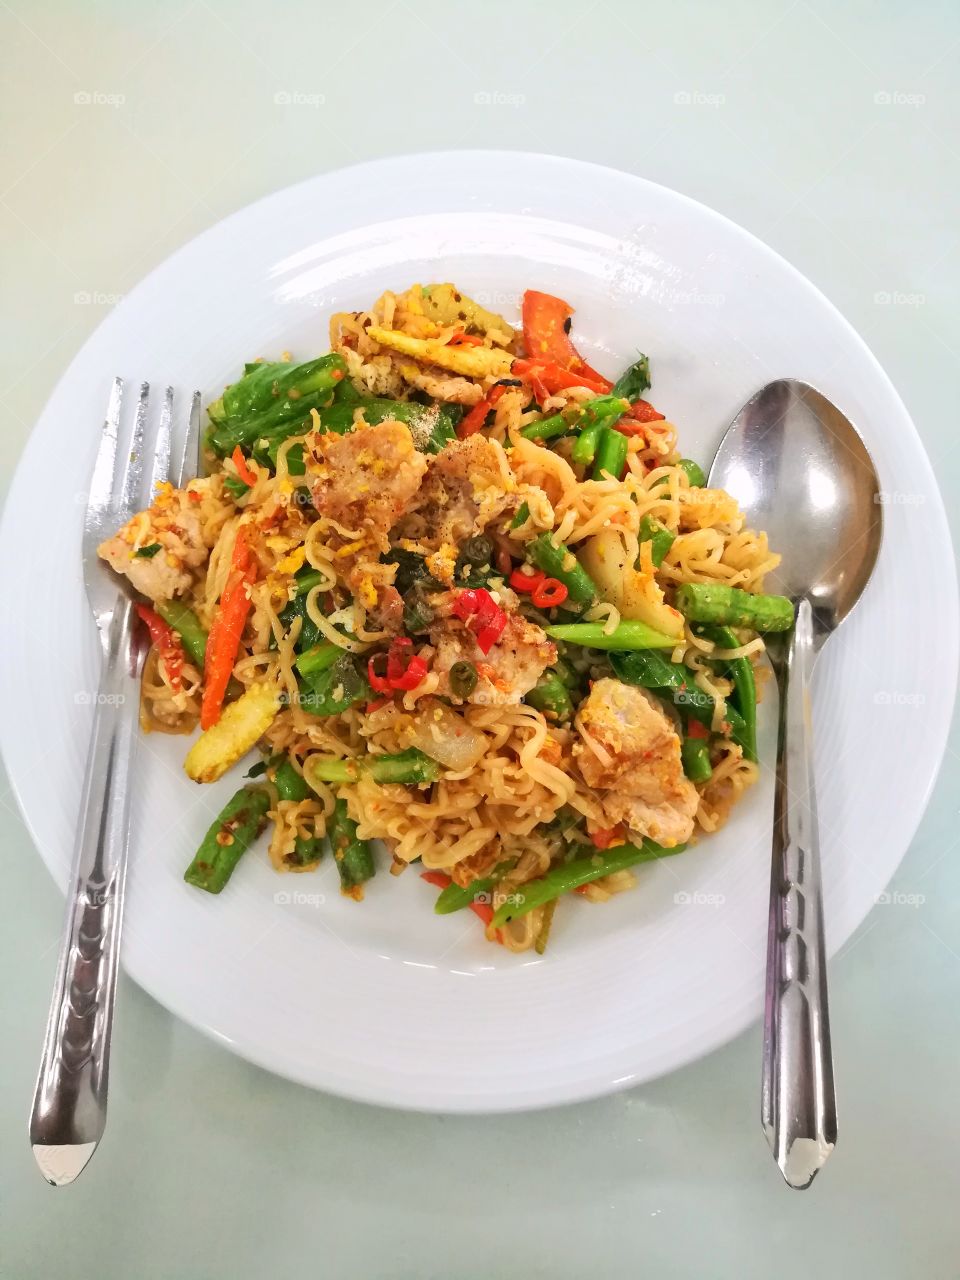 Thai spicy food, Pad kee mao. Spicy Noodle with pork and vegetables.